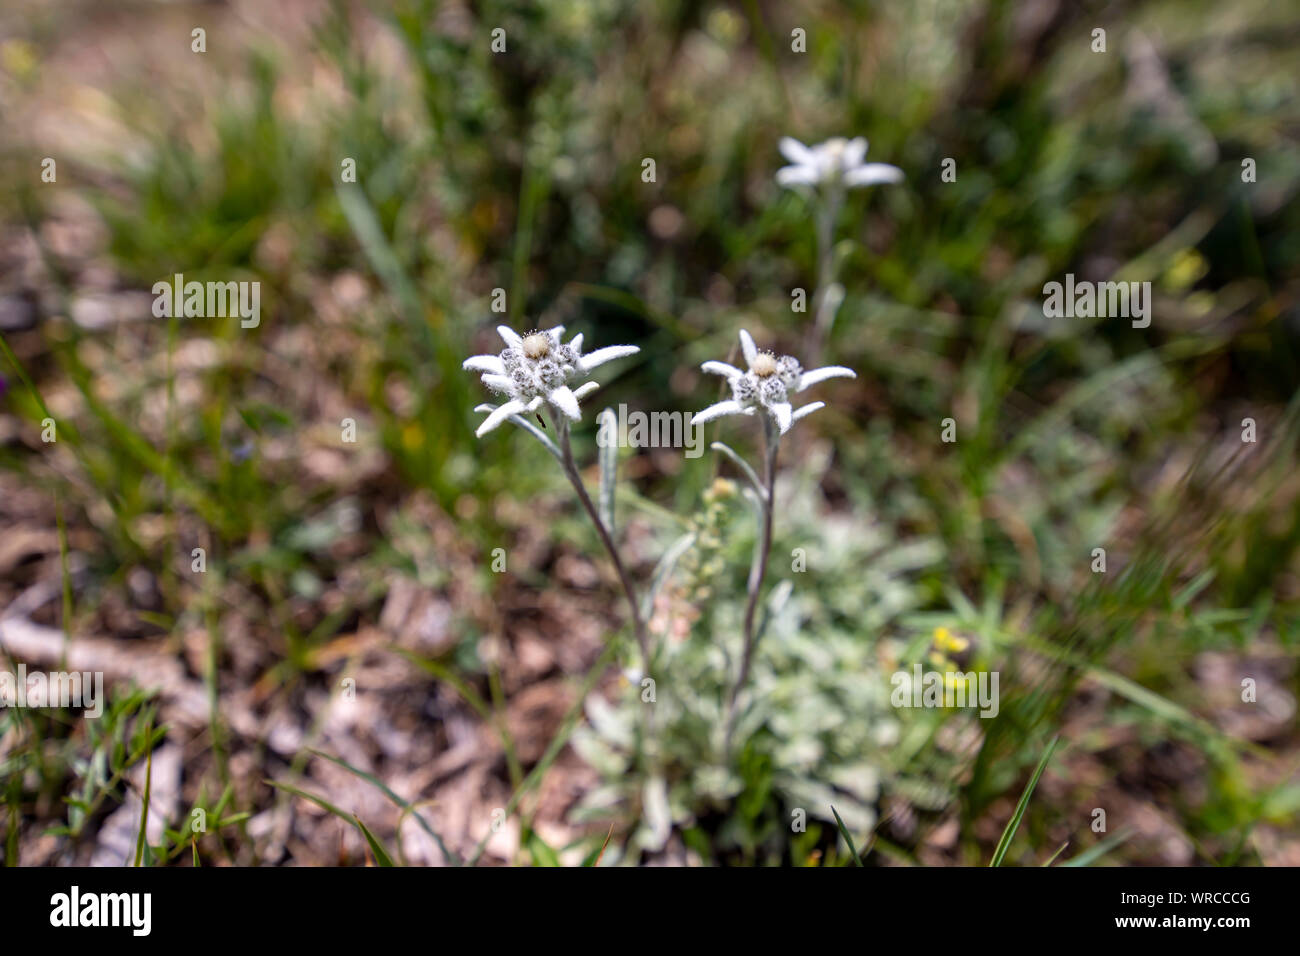 White flowers of mountain edelweiss closeup on a blurred background Stock Photo